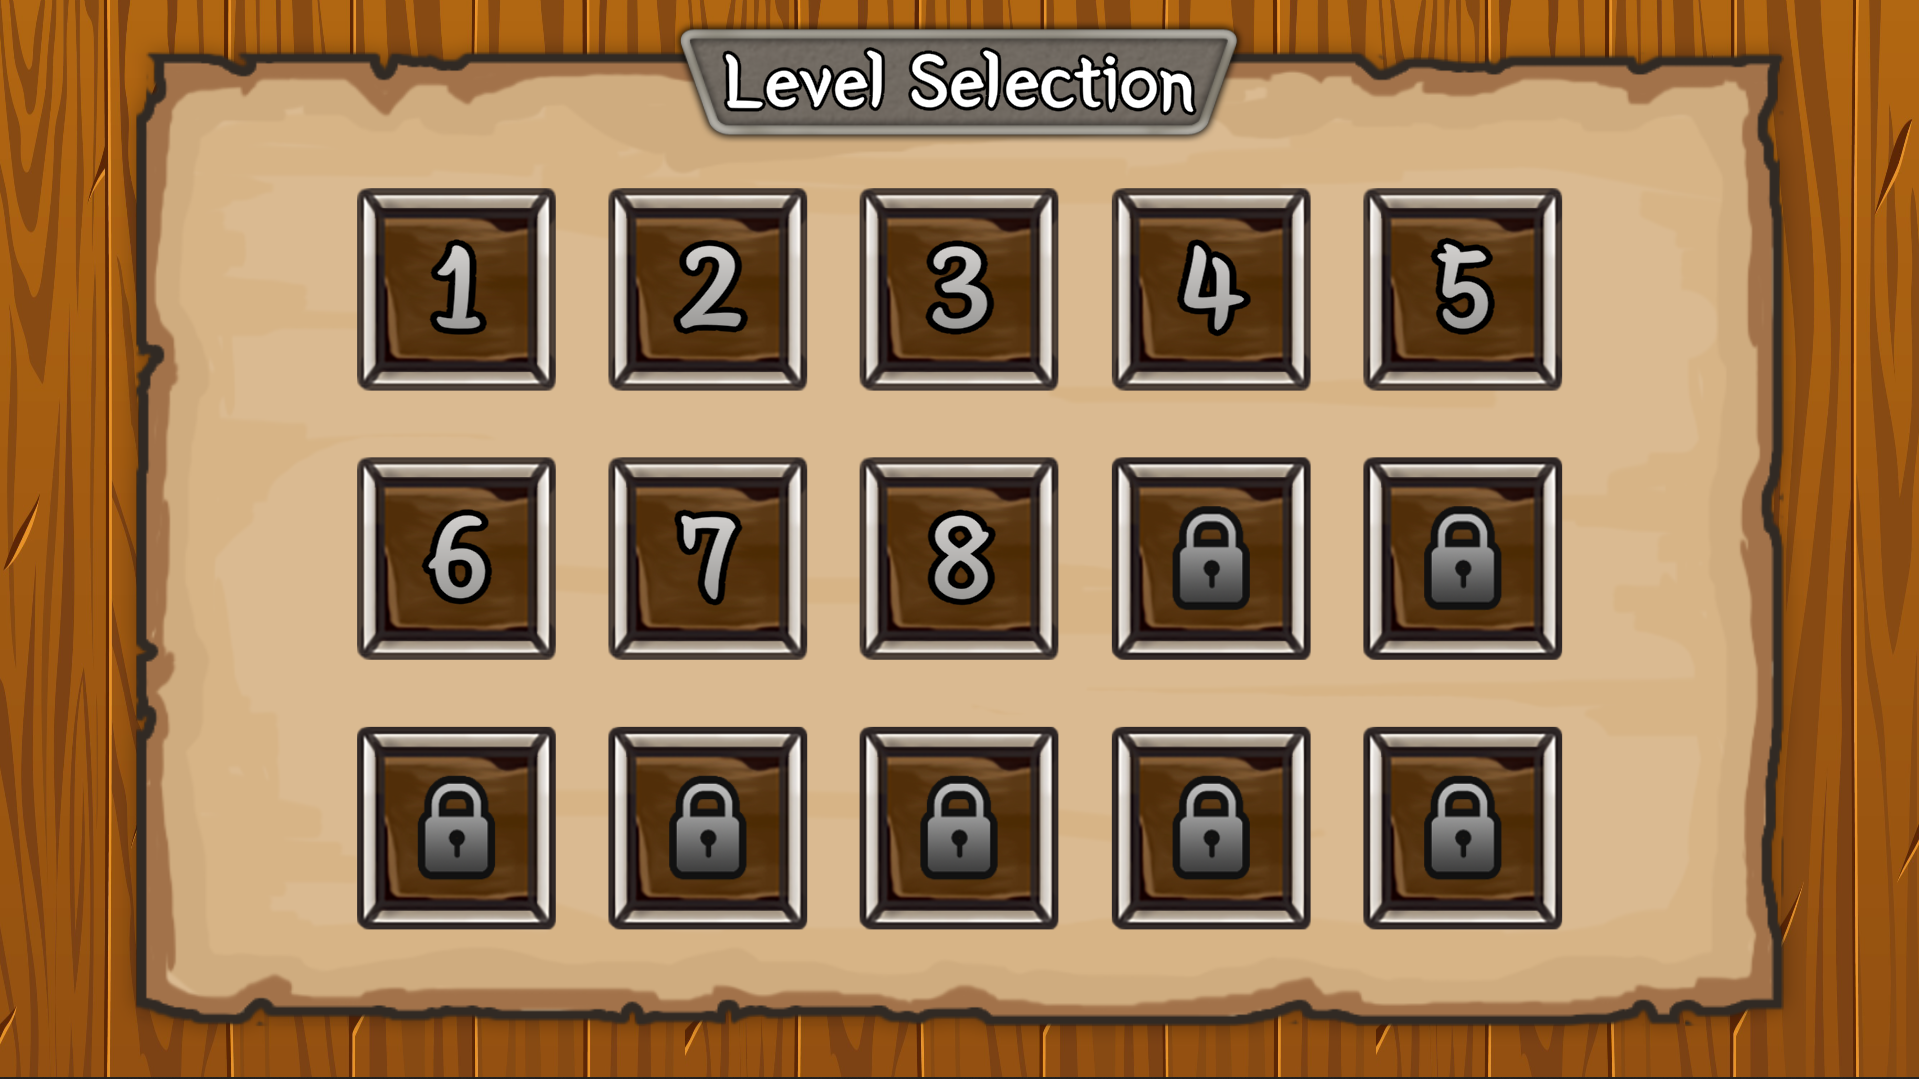 The level select screen